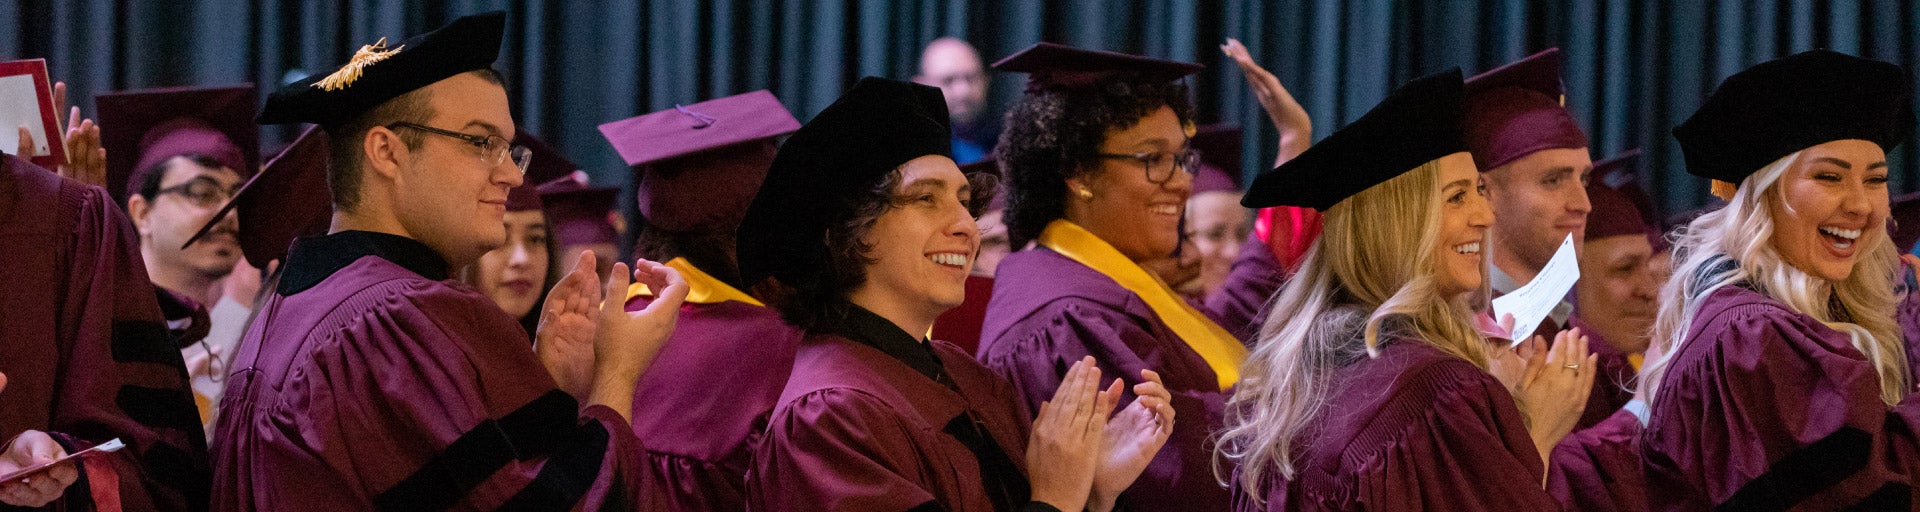 JD and MLS students clapping during the ASU Law convocation ceremony.